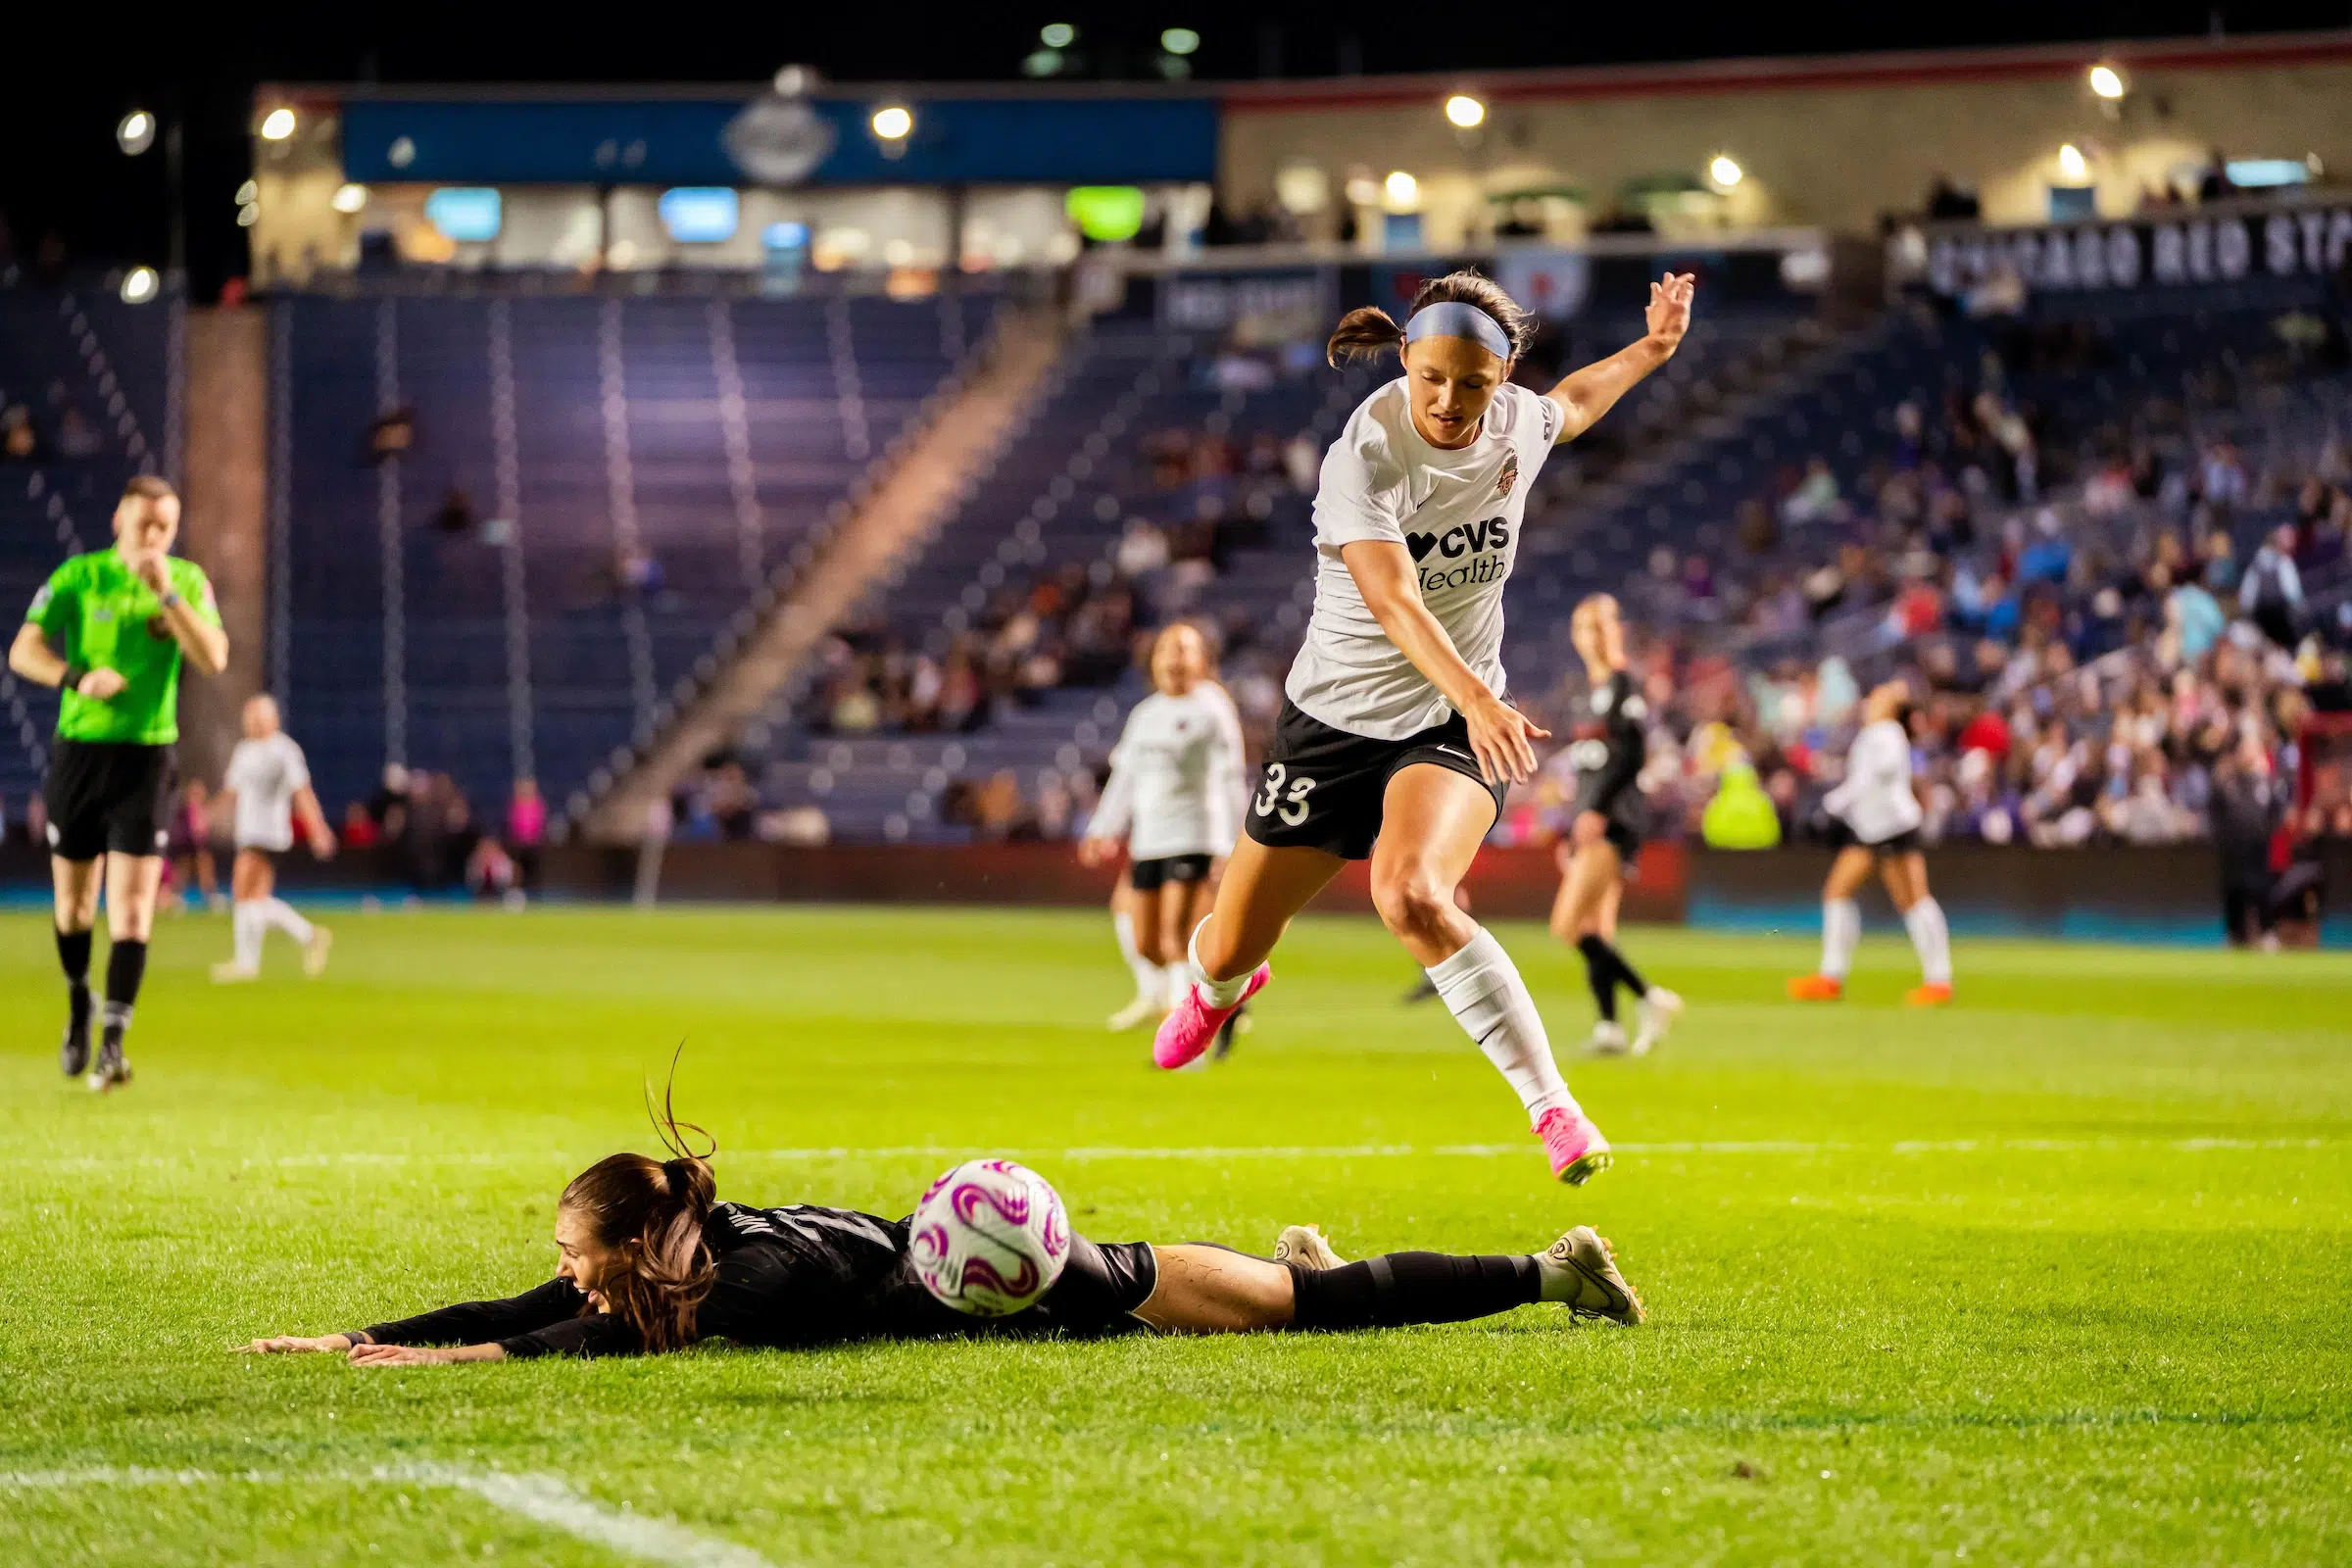 Ashley Hatch in a white top, black shorts, white socks and pink cleats jumps over a defender in a black uniform who lies on the ground.